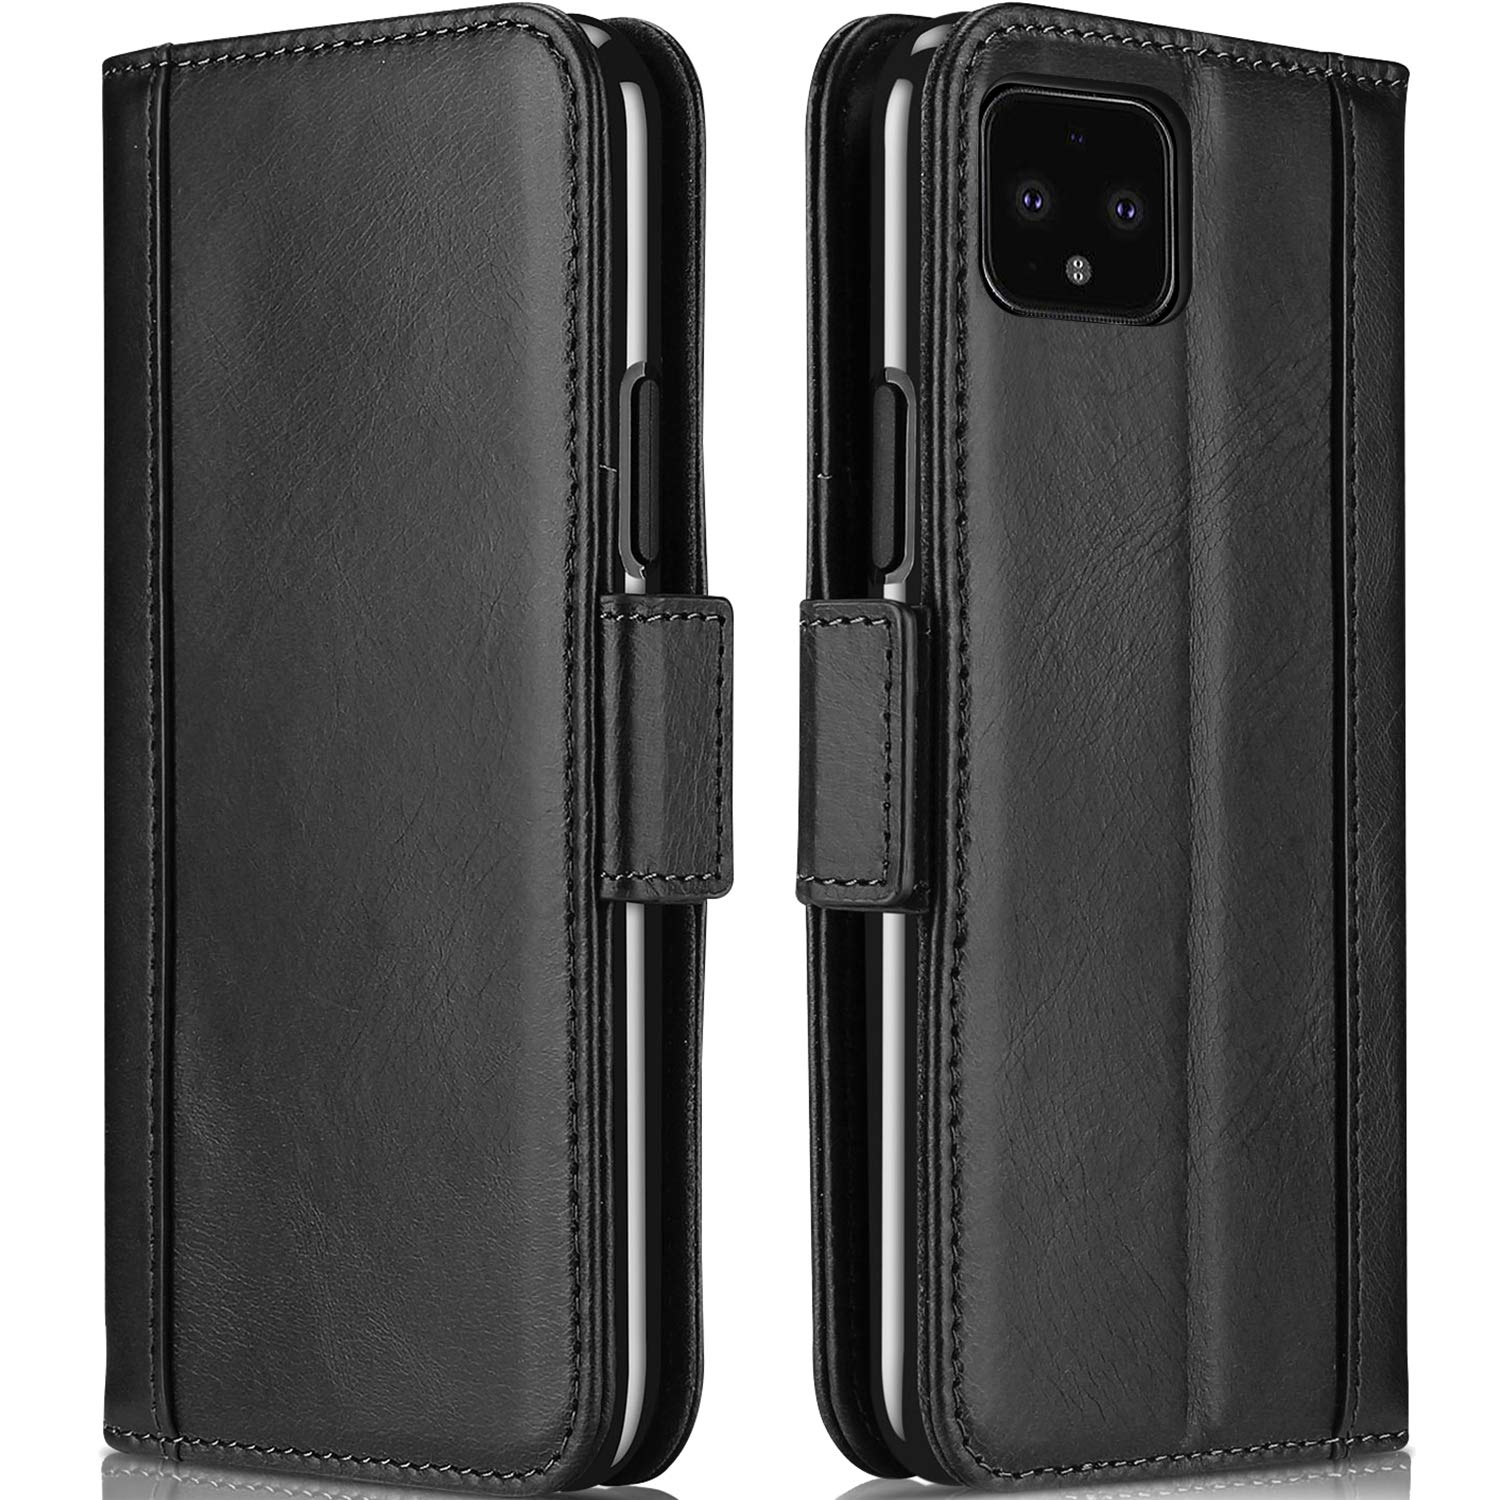 procase genuine leather wallet for the pixel 4